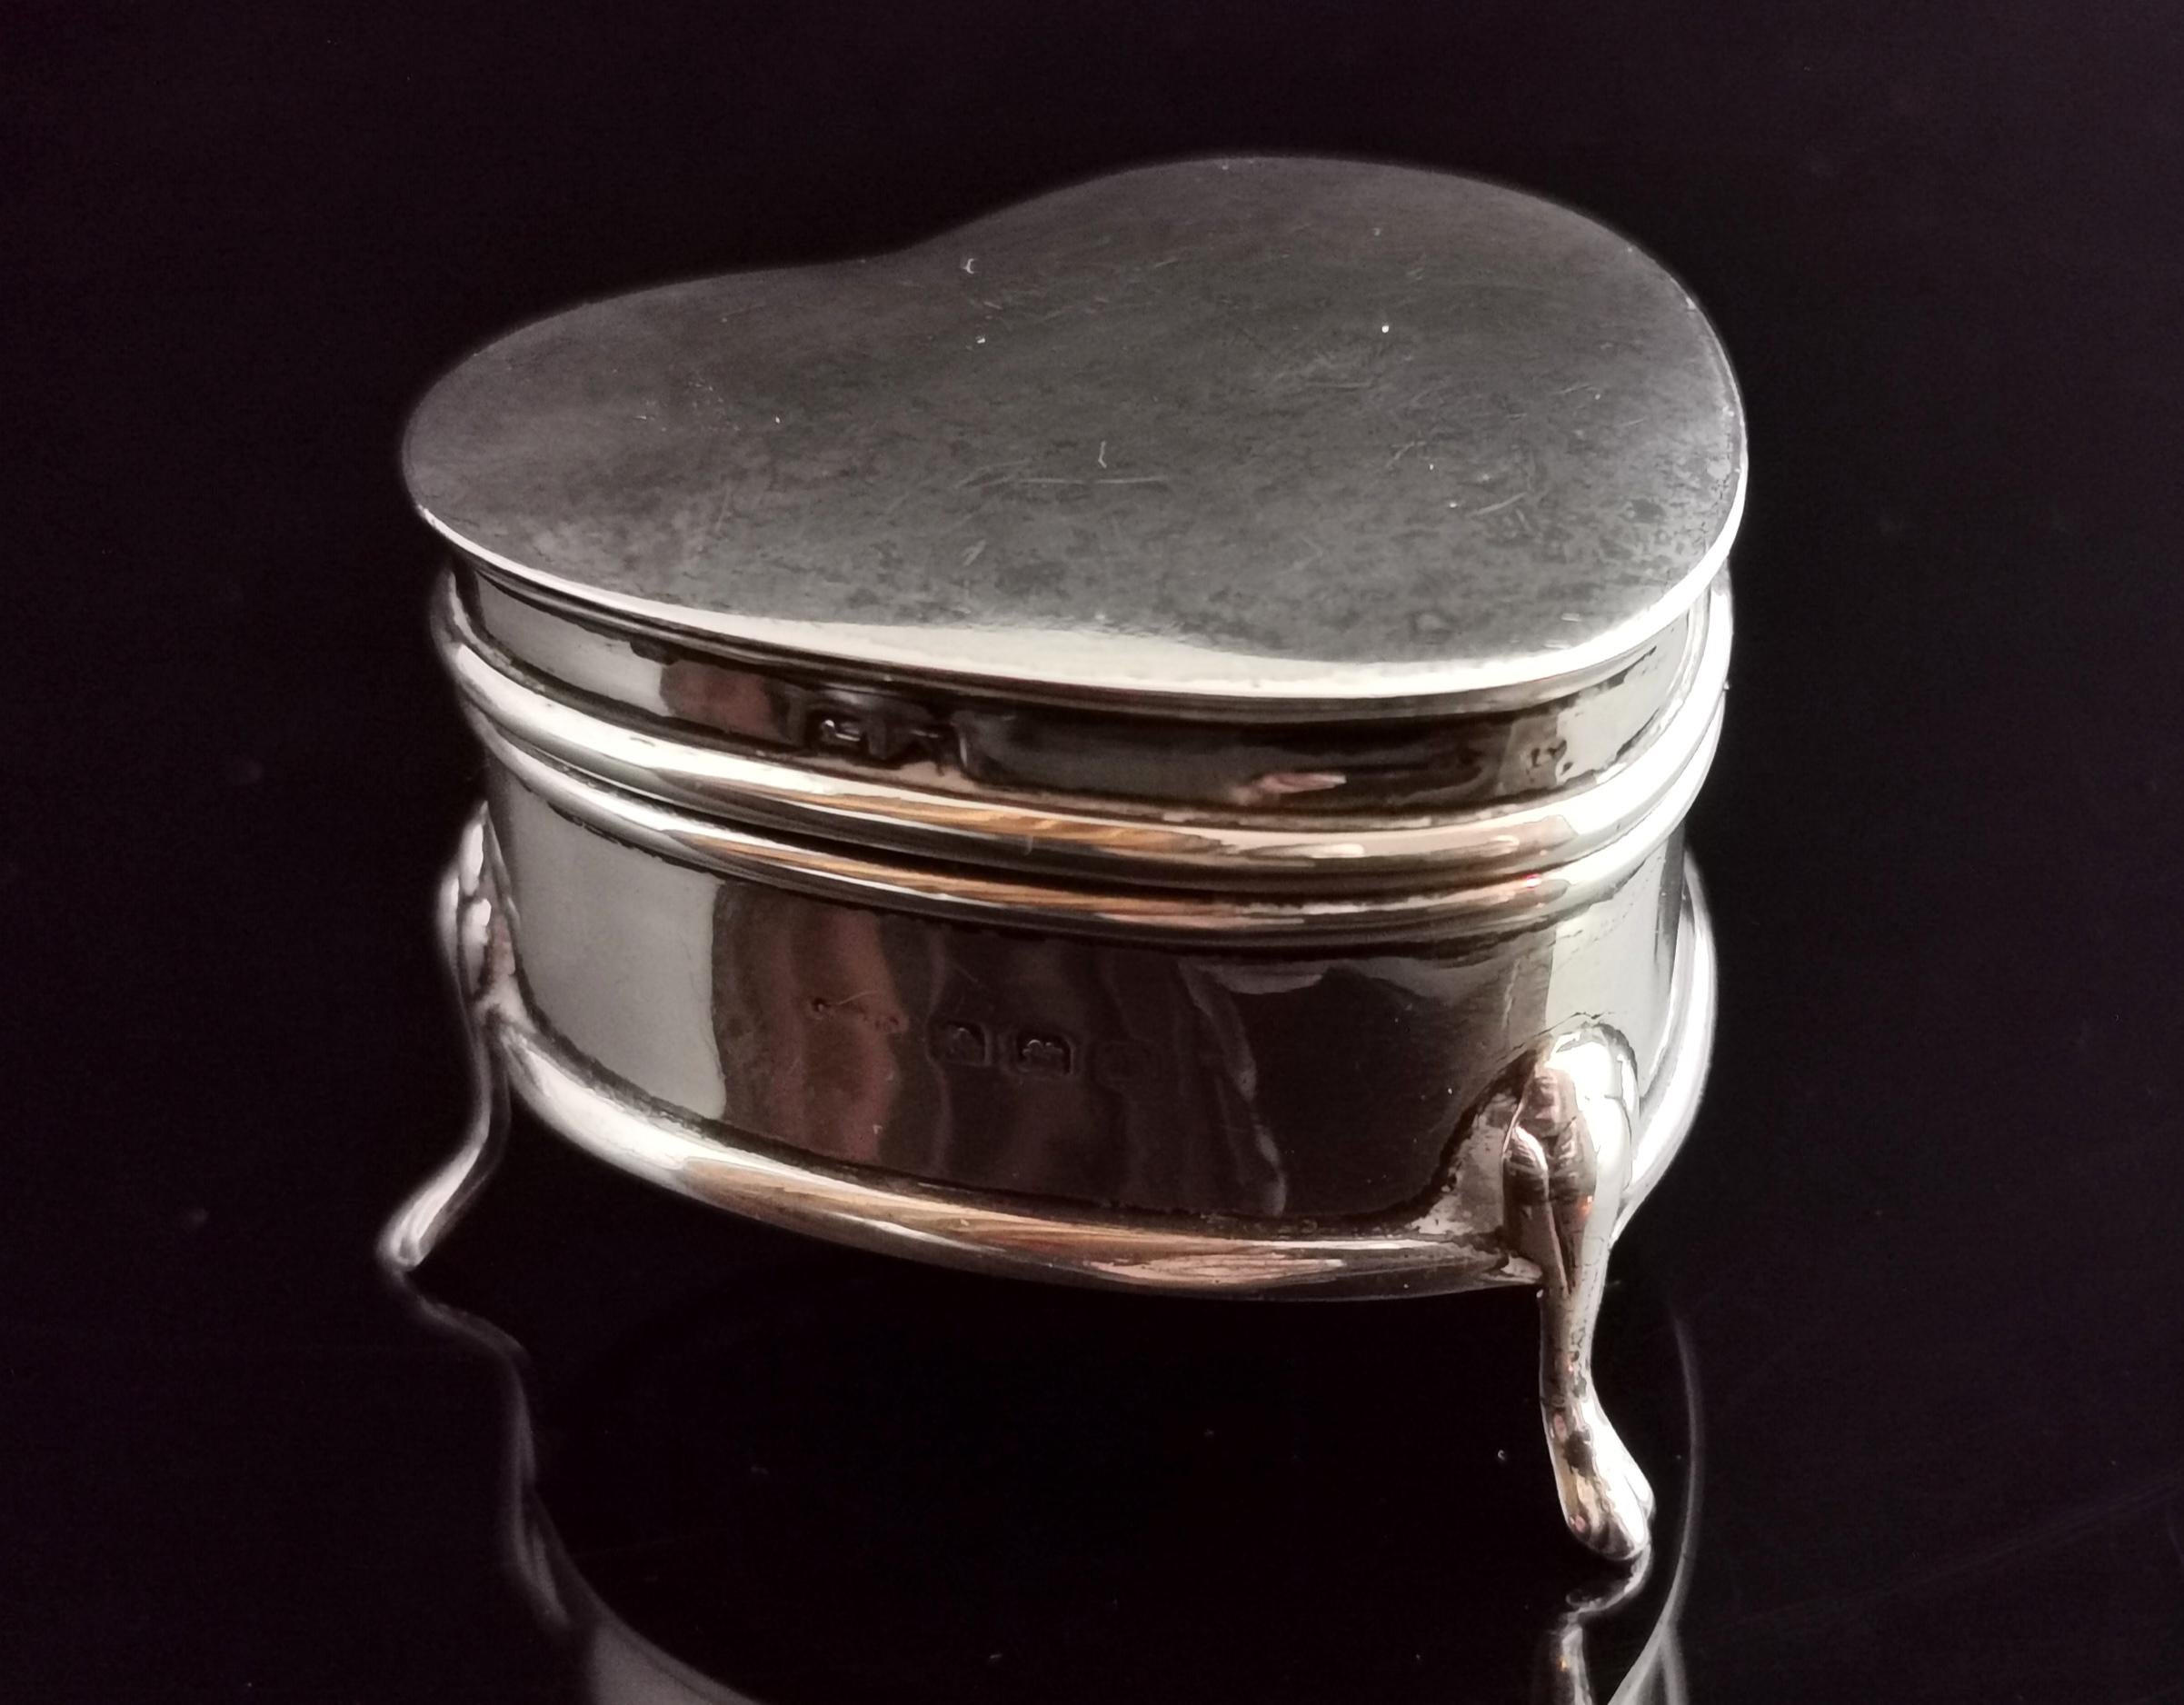 A beautiful Art Deco heart shaped sterling silver jewellery box.

It is a lovely piece perfect for showcasing a gift or storing your most precious pieces.

Made from solid sterling silver it stands raised on four paw feet and is shaped like a love